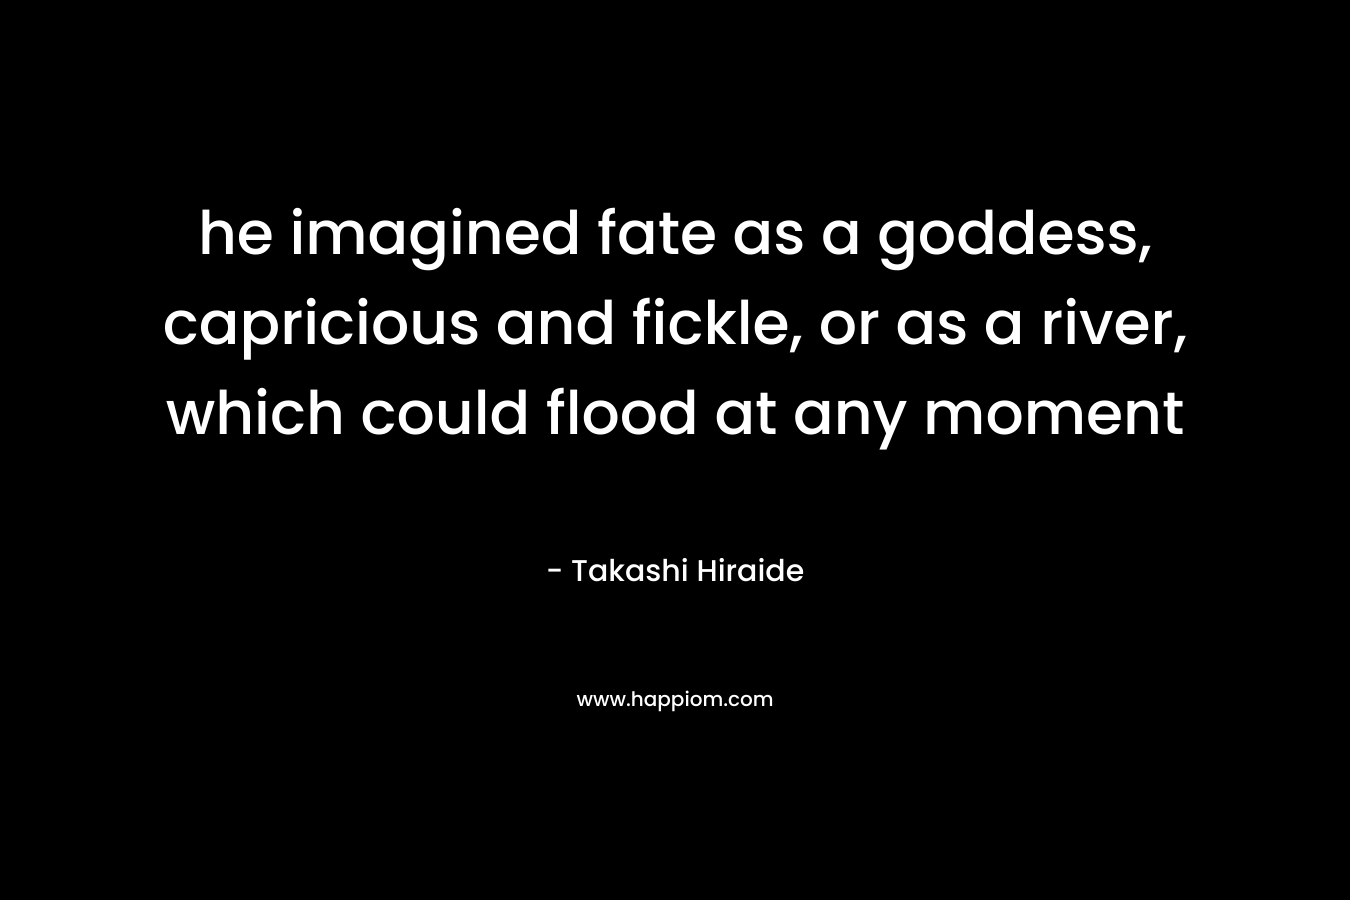 he imagined fate as a goddess, capricious and fickle, or as a river, which could flood at any moment